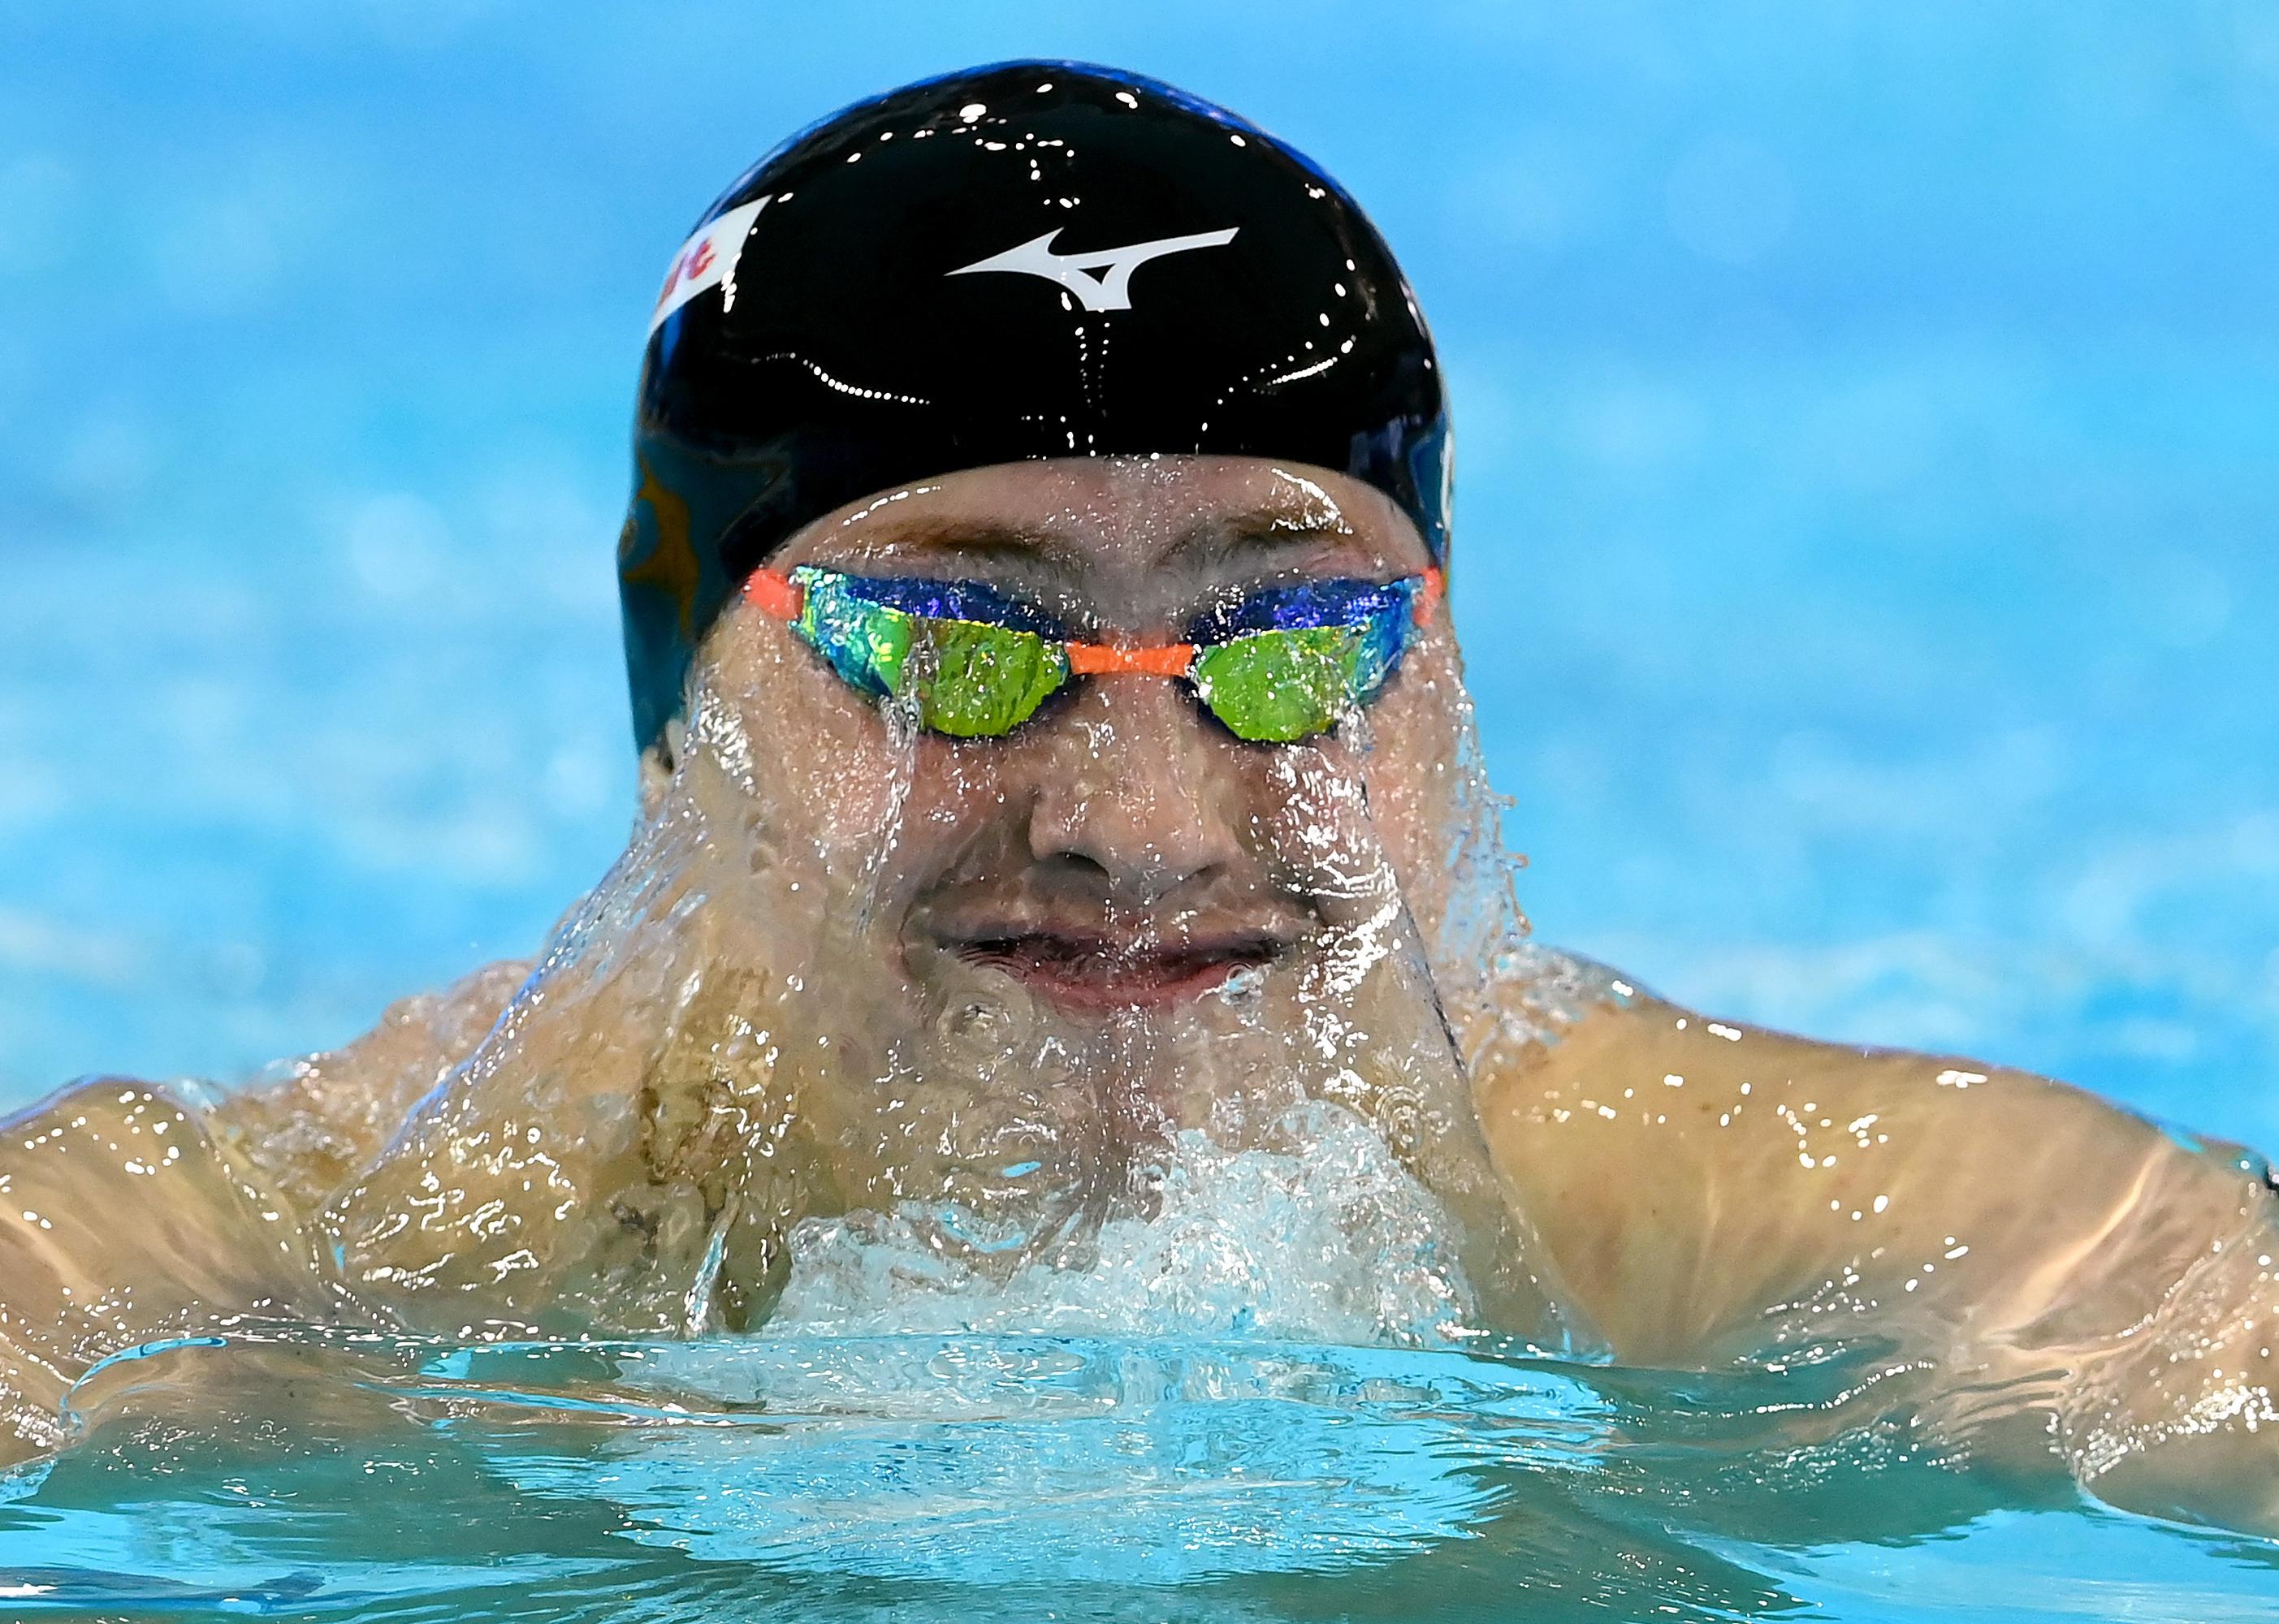 Carson Foster competes in a Men's 400m Individual Medley.